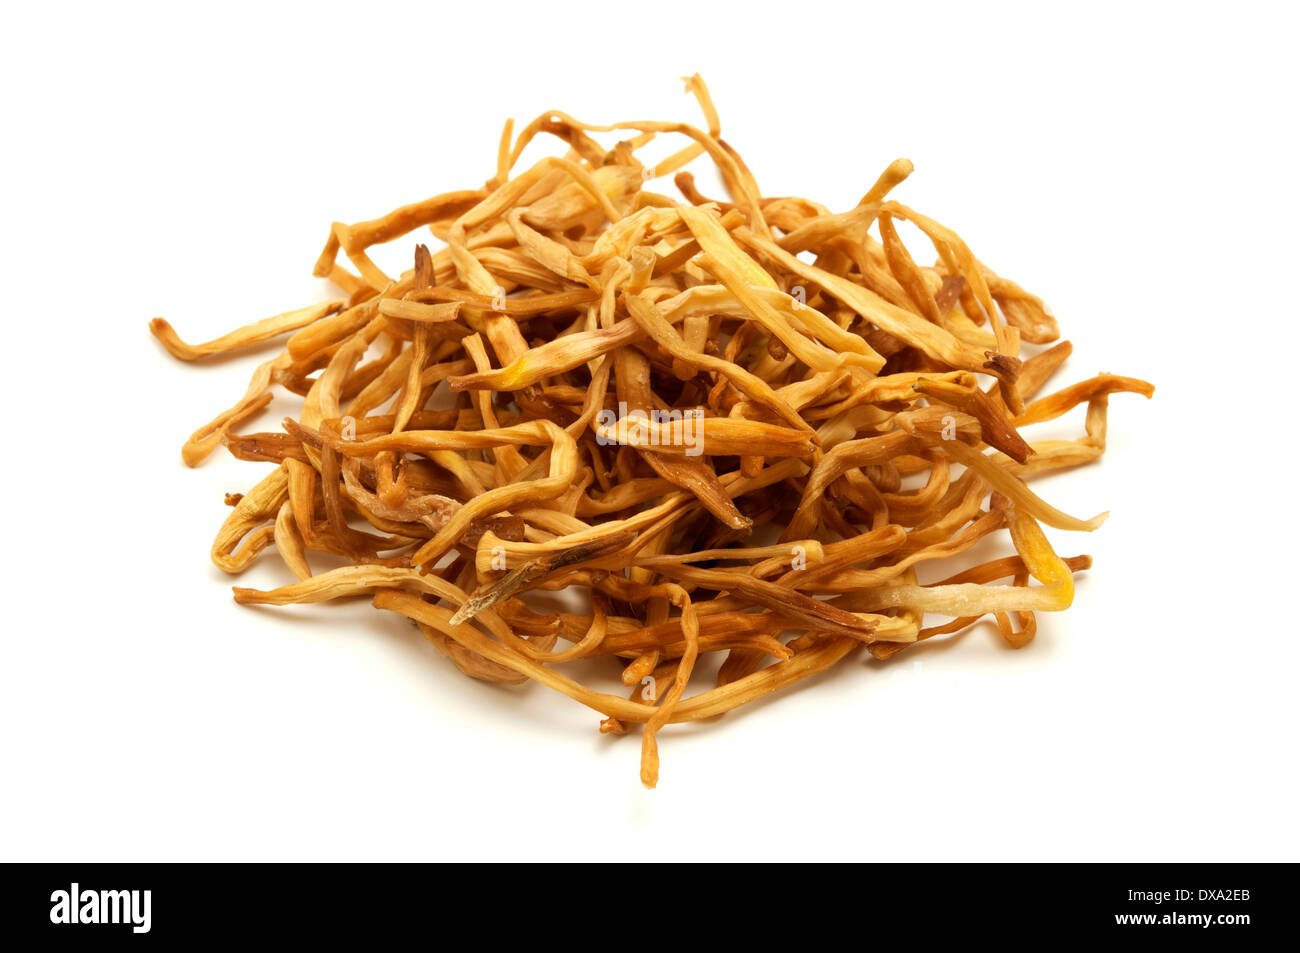 Golden needles (dried lily flowers) on a white background Stock Photo